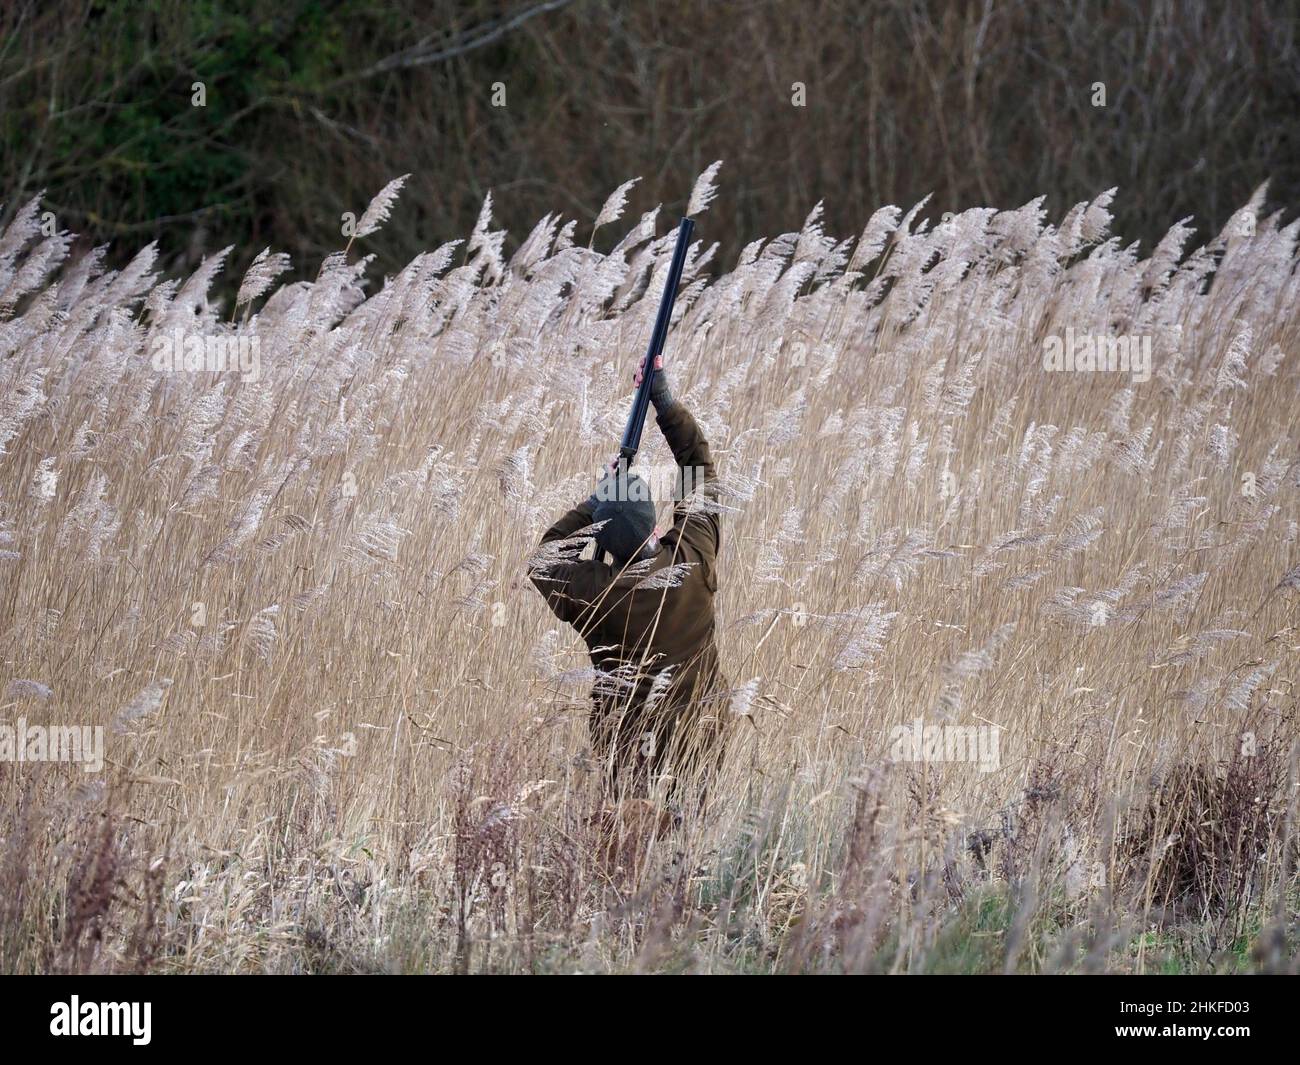 Wildfowling at a Norfolk Marsh, man standing in reeds shooting at ducks. Stock Photo